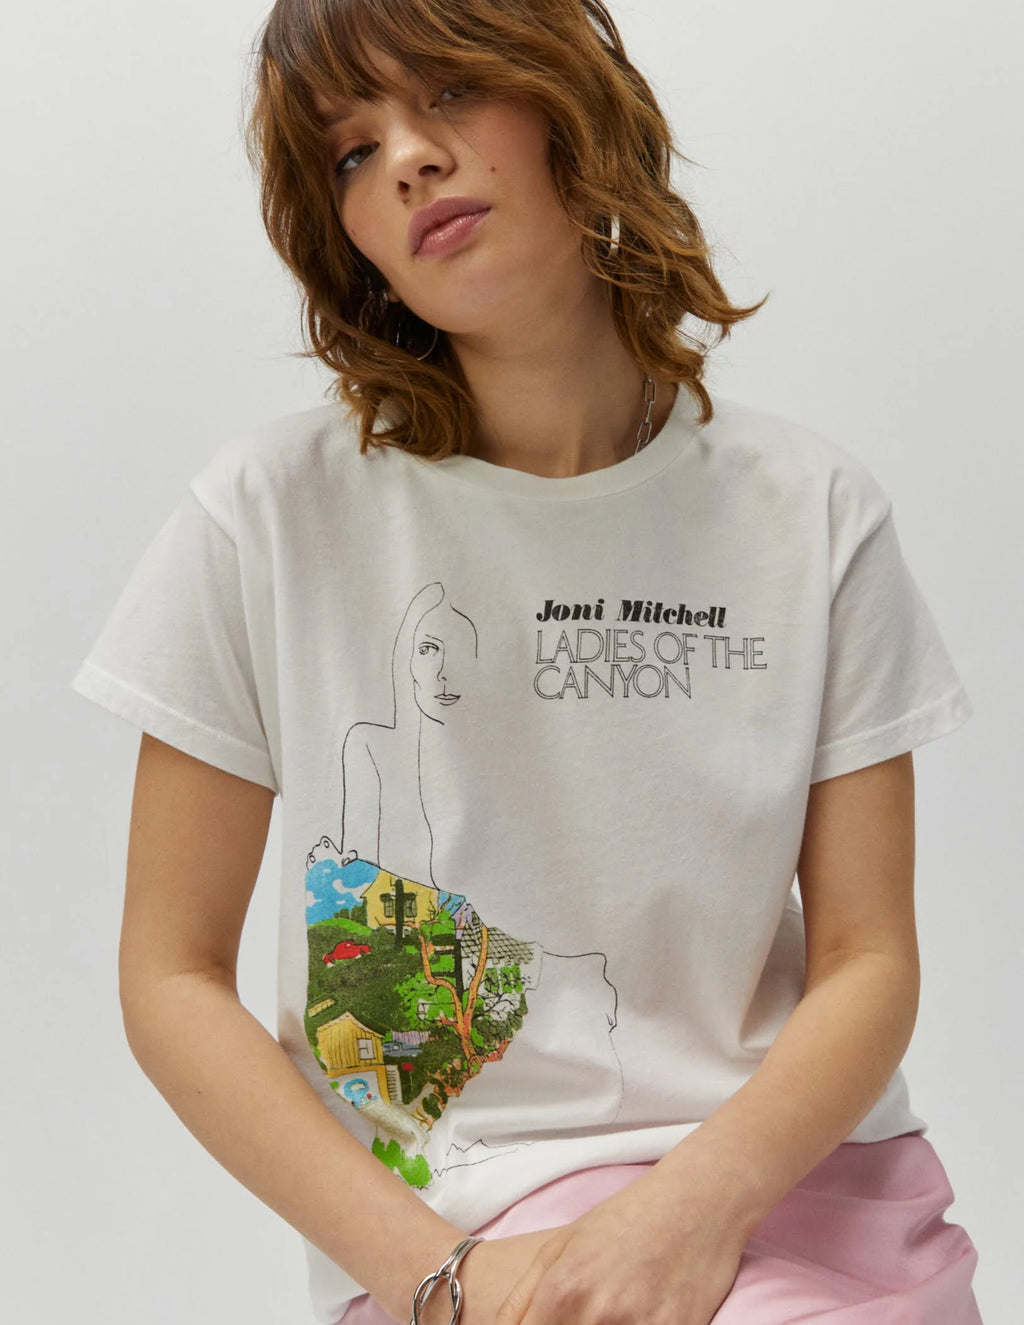 JONI MITCHELL LADIES OF THE CANYON SOLO TEE